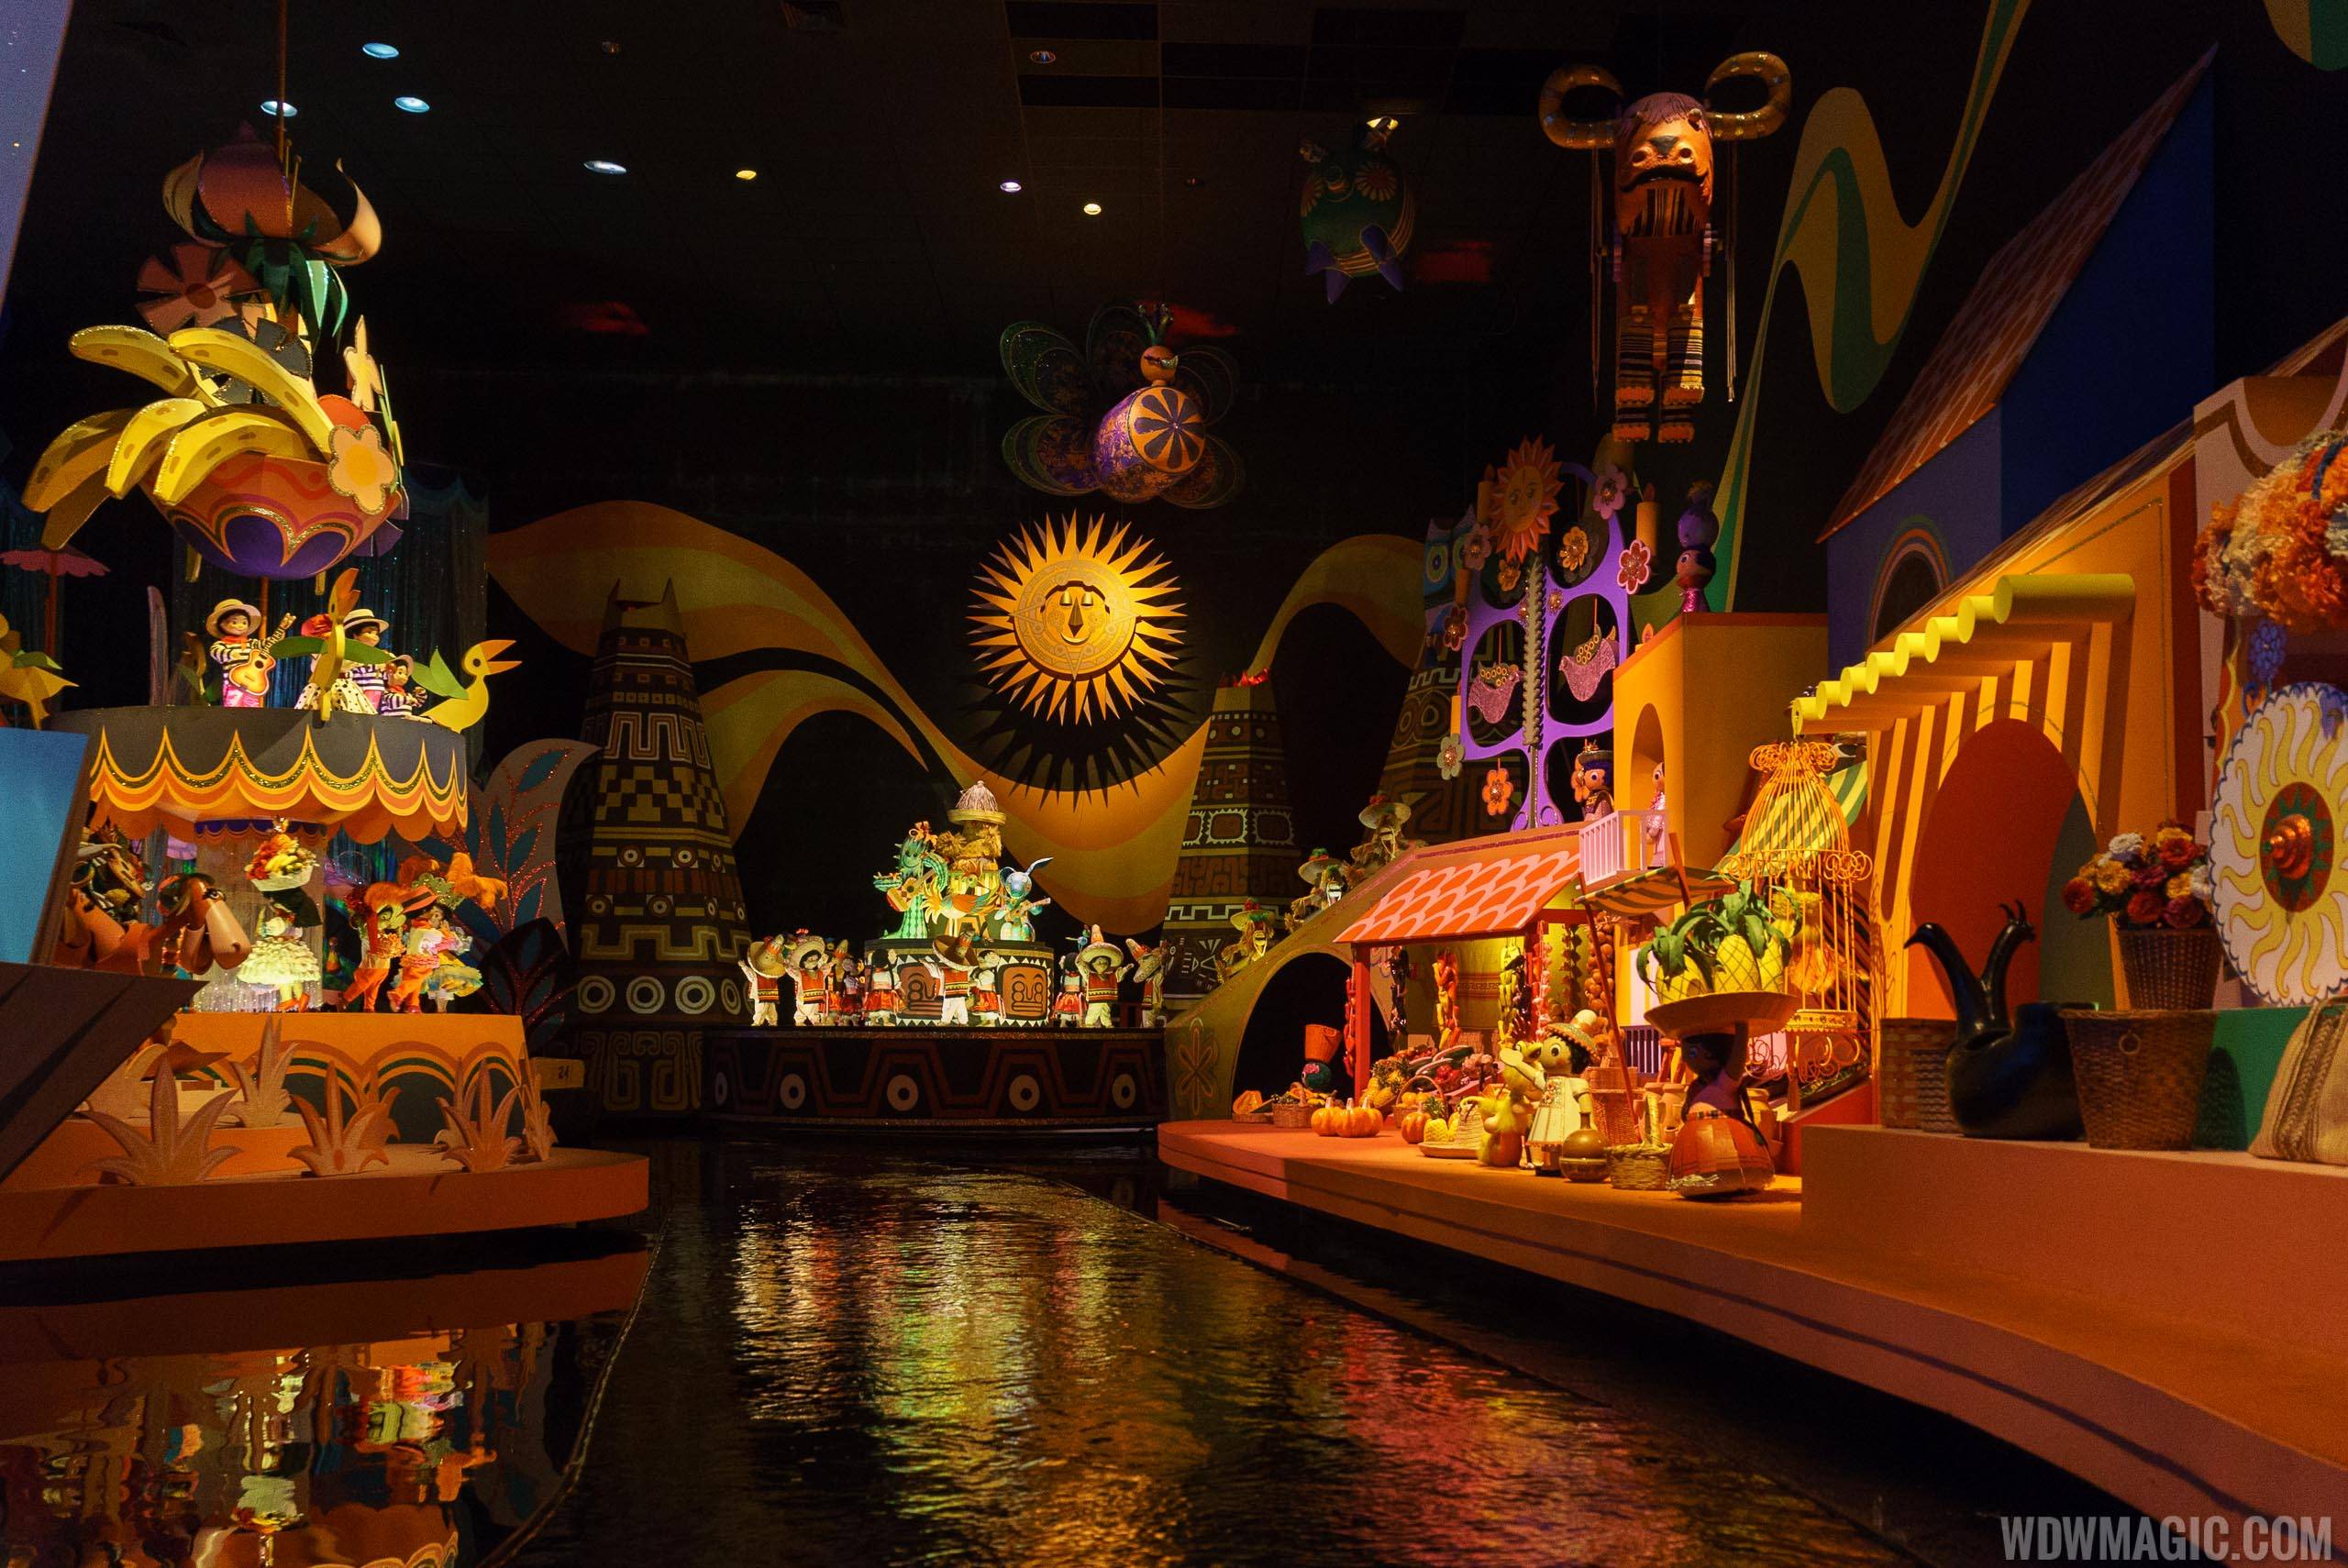 'it's a small world' closing for short refurbishment in late July 2021